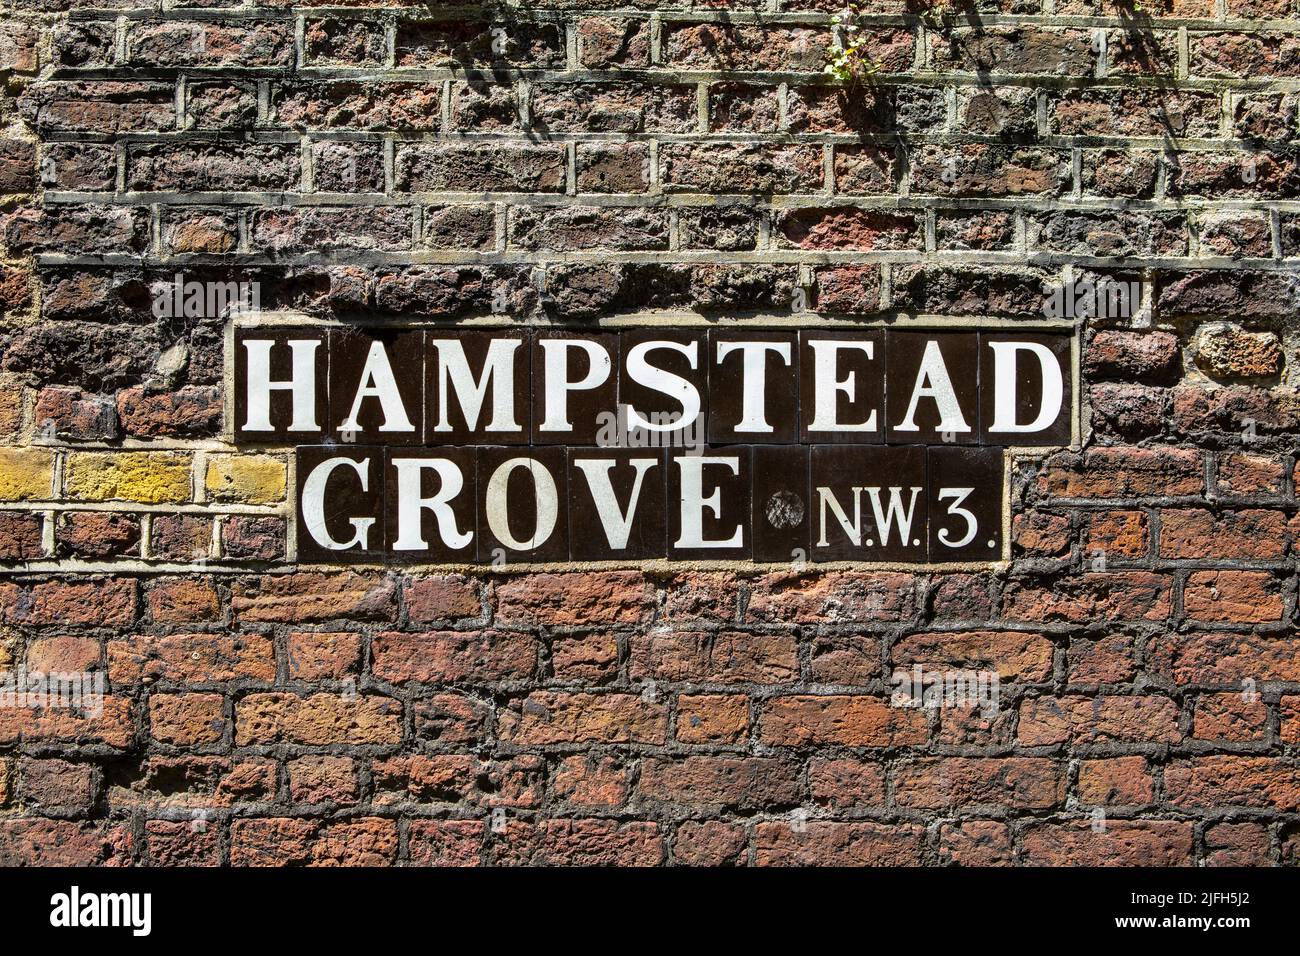 Close-up of a vintage street sign for Hampstead Grove, in the Hampstead area of London, UK. Stock Photo